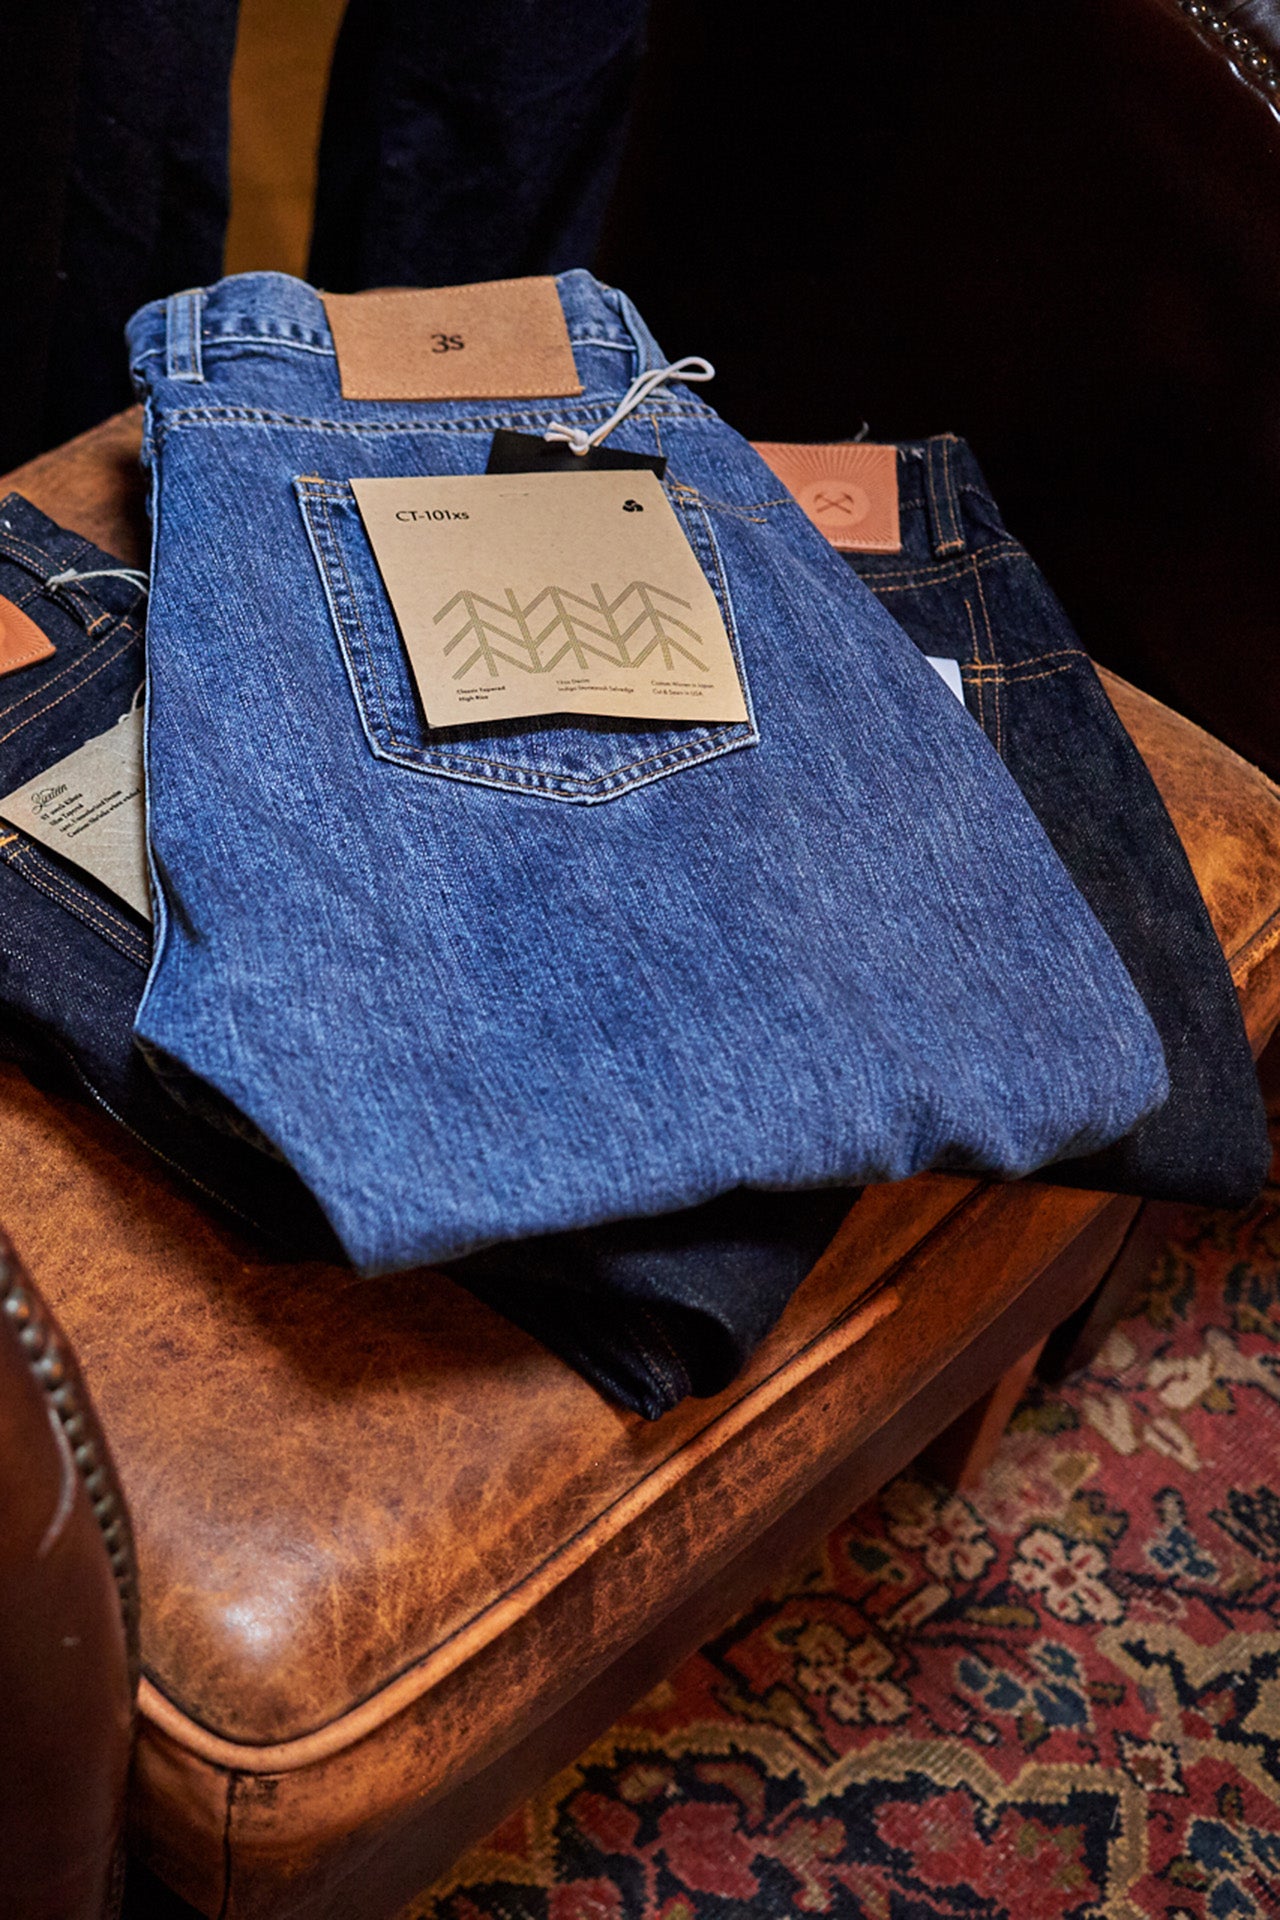 3sixteen blue jeans sit stacked on a beautiful aged leather ottoman.